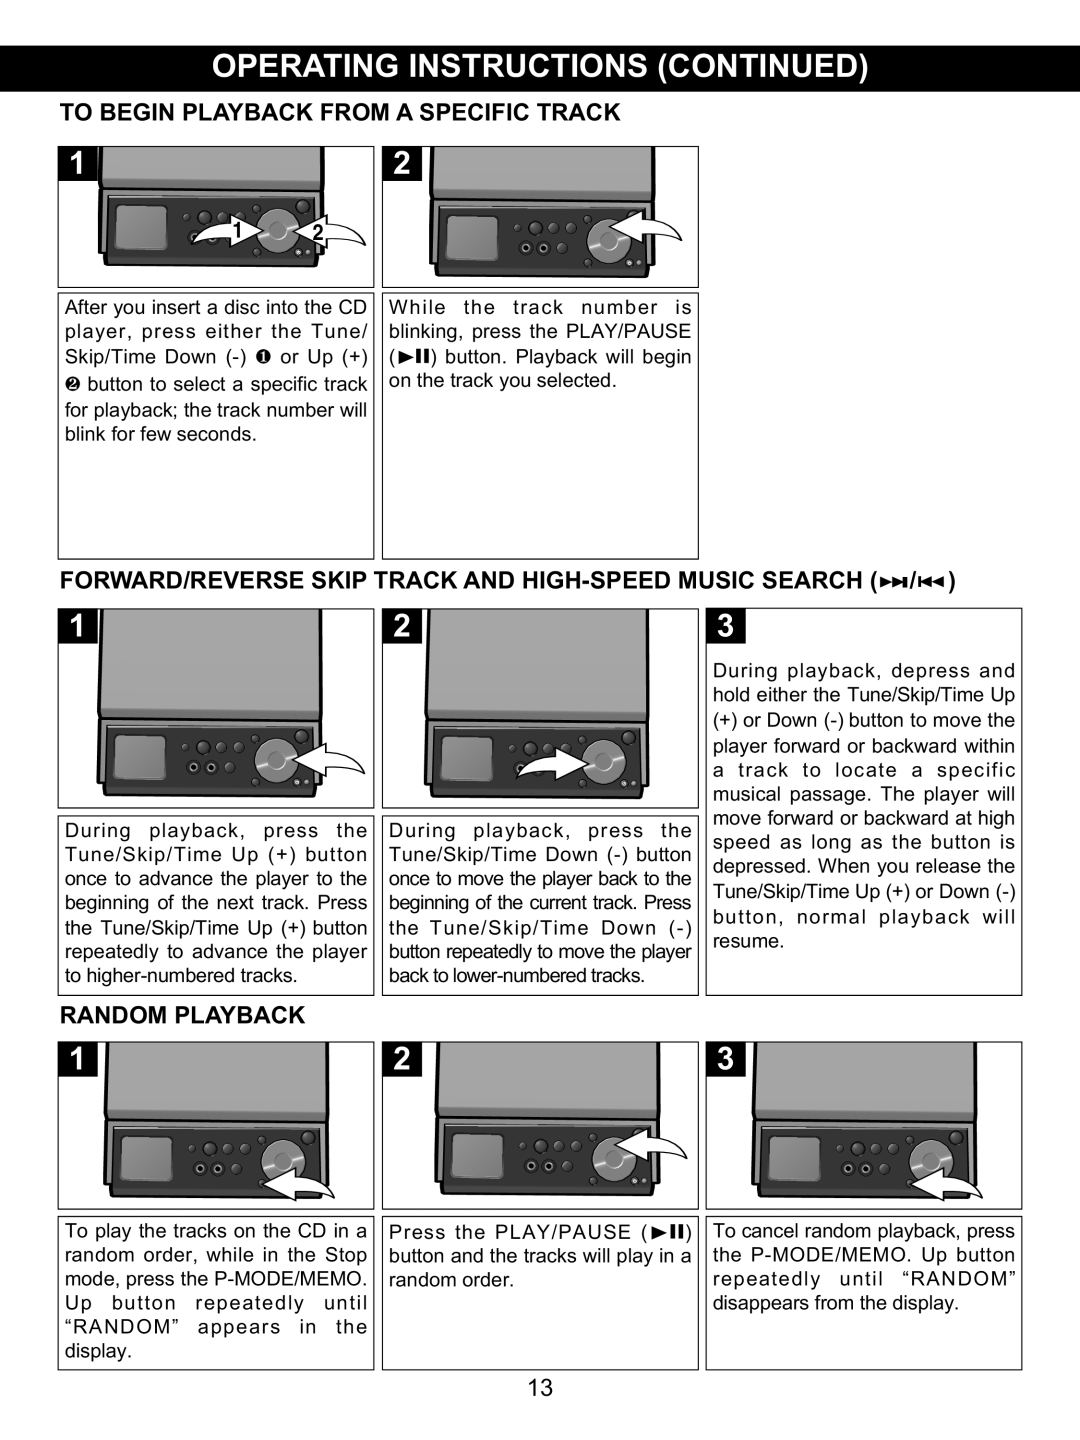 Memorex MX4139 manual To Begin Playback From A Specific Track, Random Playback 